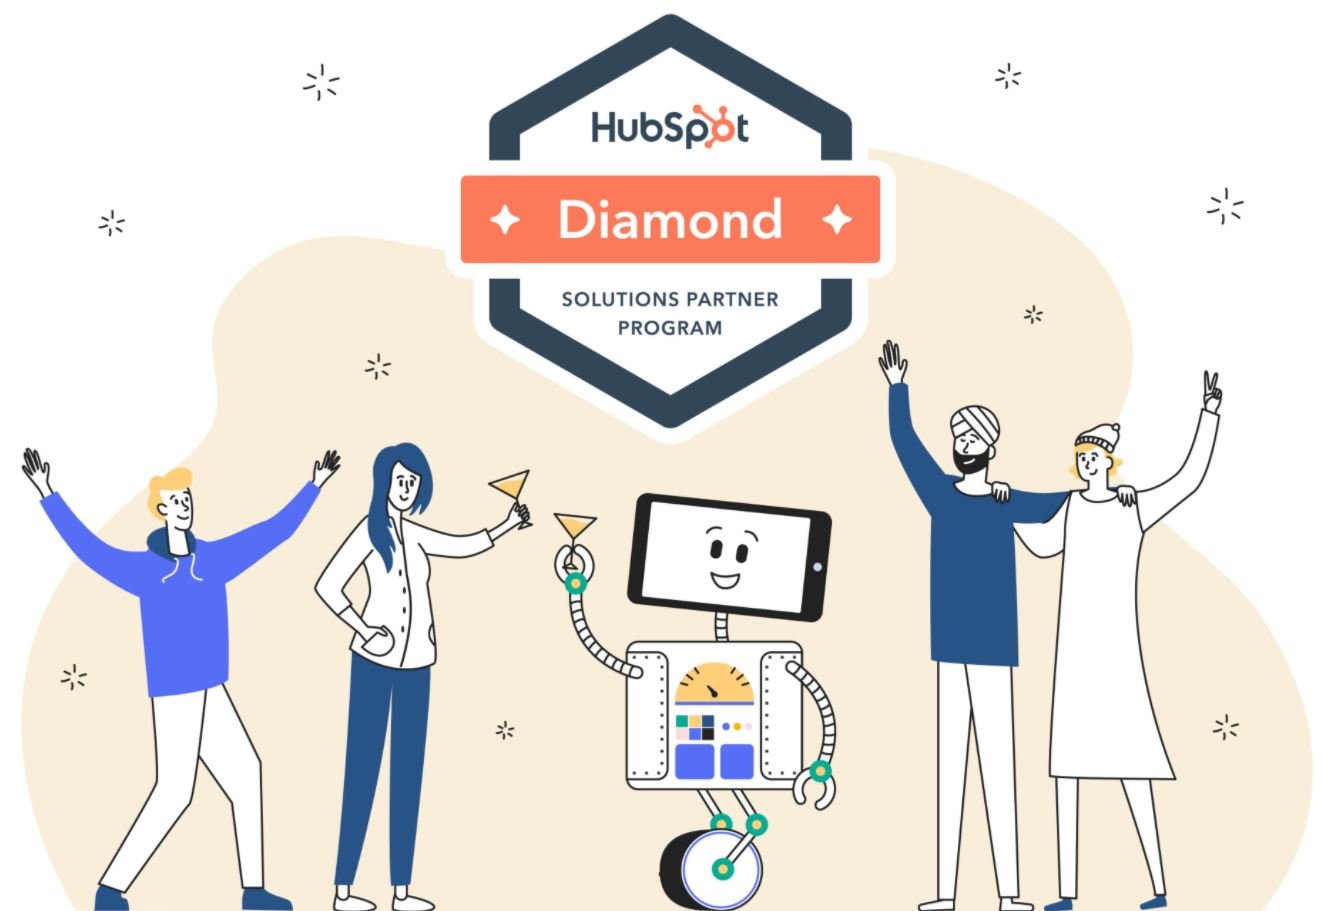 Level up: Articulate Marketing is a HubSpot Diamond Solutions Partner agency!